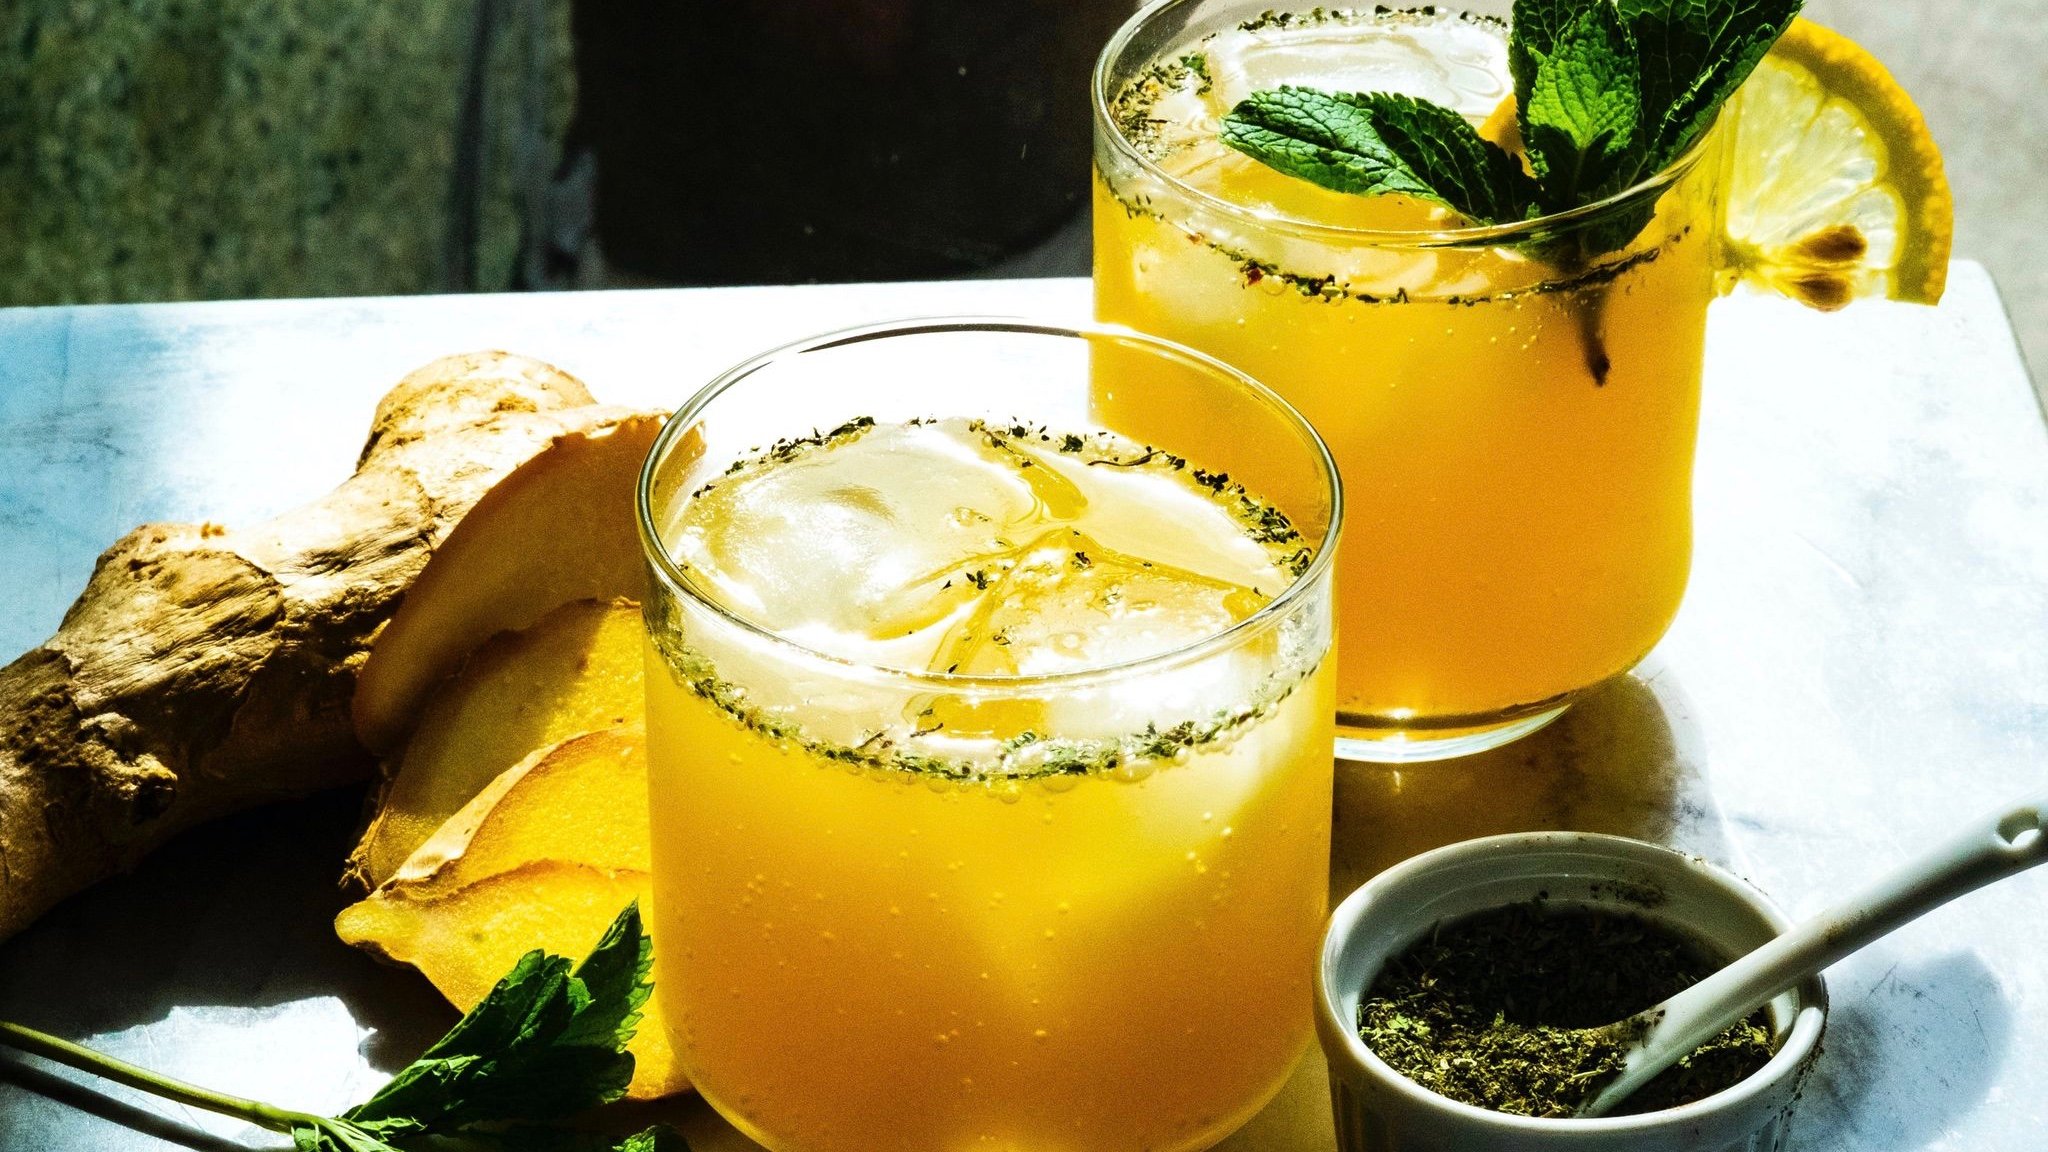 Two orange drinks sit in sunlight, surrounded by ingredients